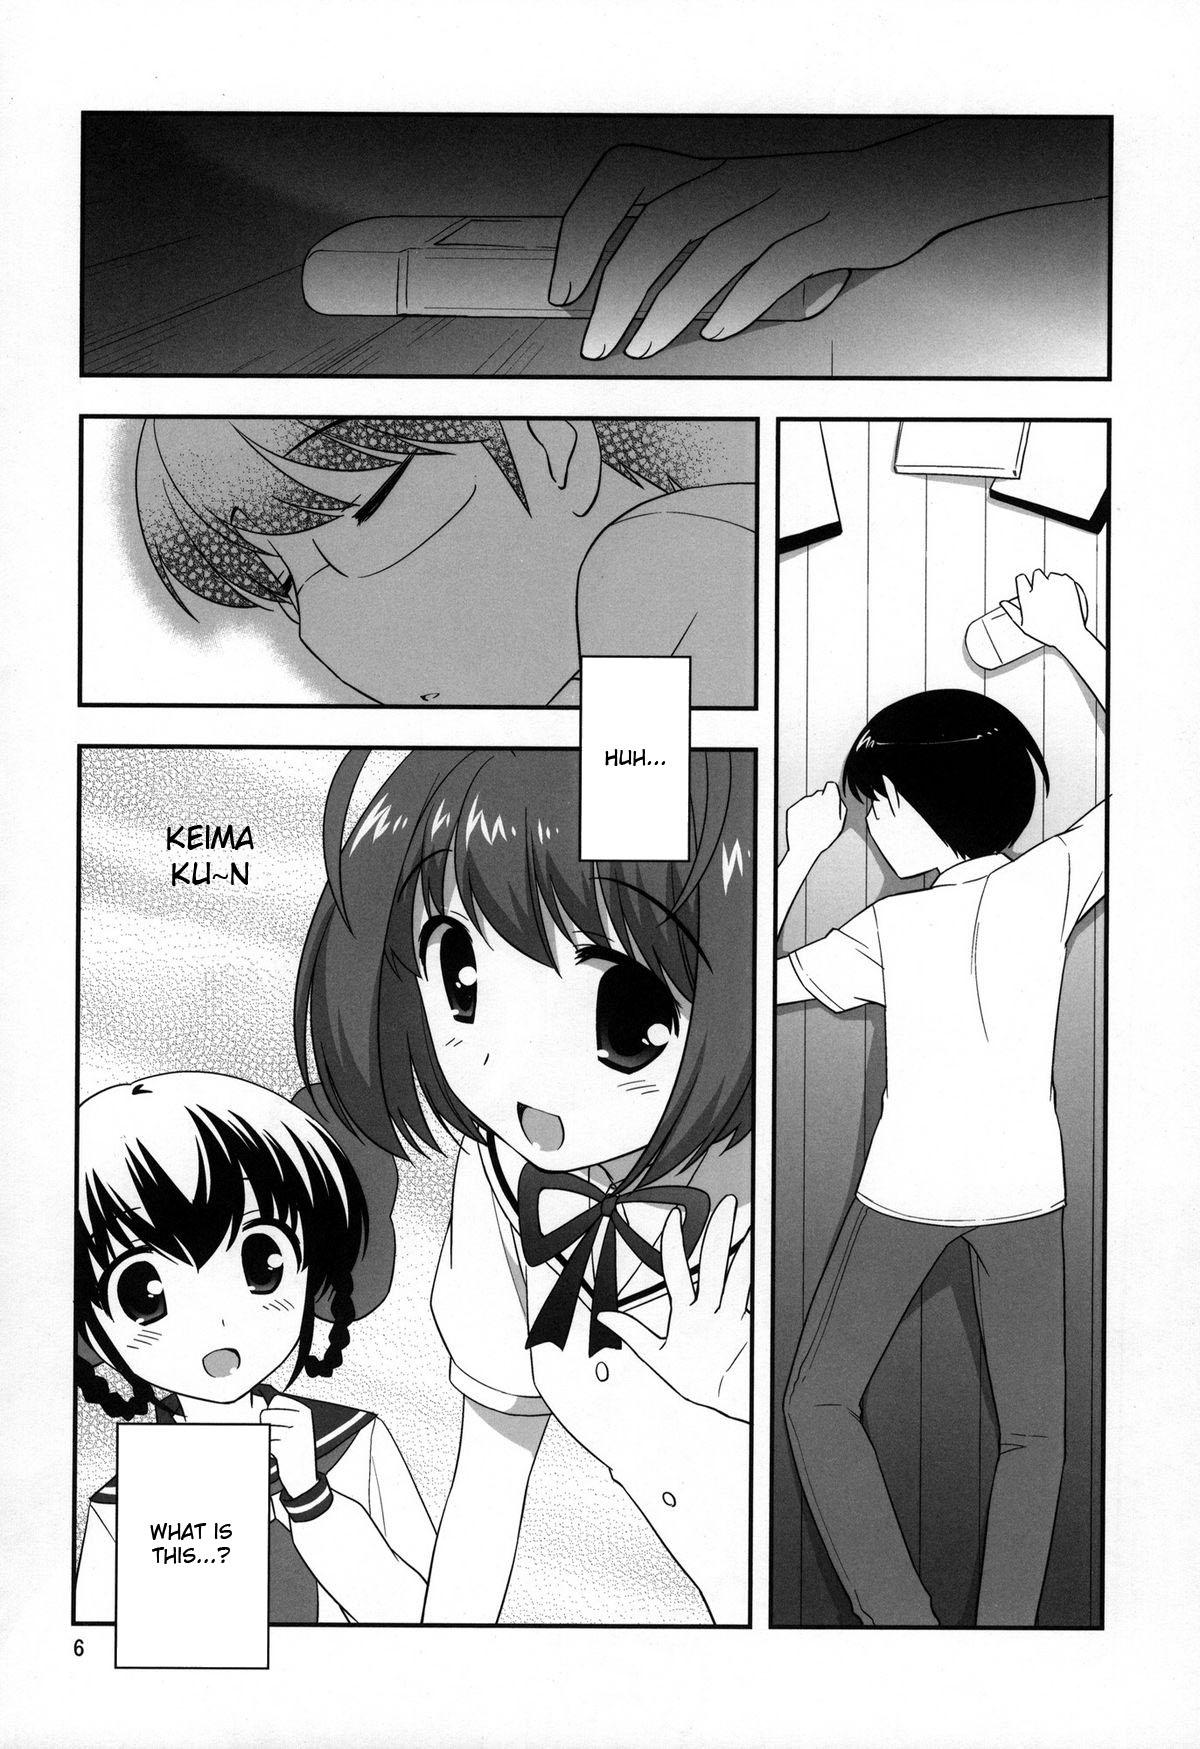 Friends Yokkyuuuuun! - The world god only knows Petera - Page 5